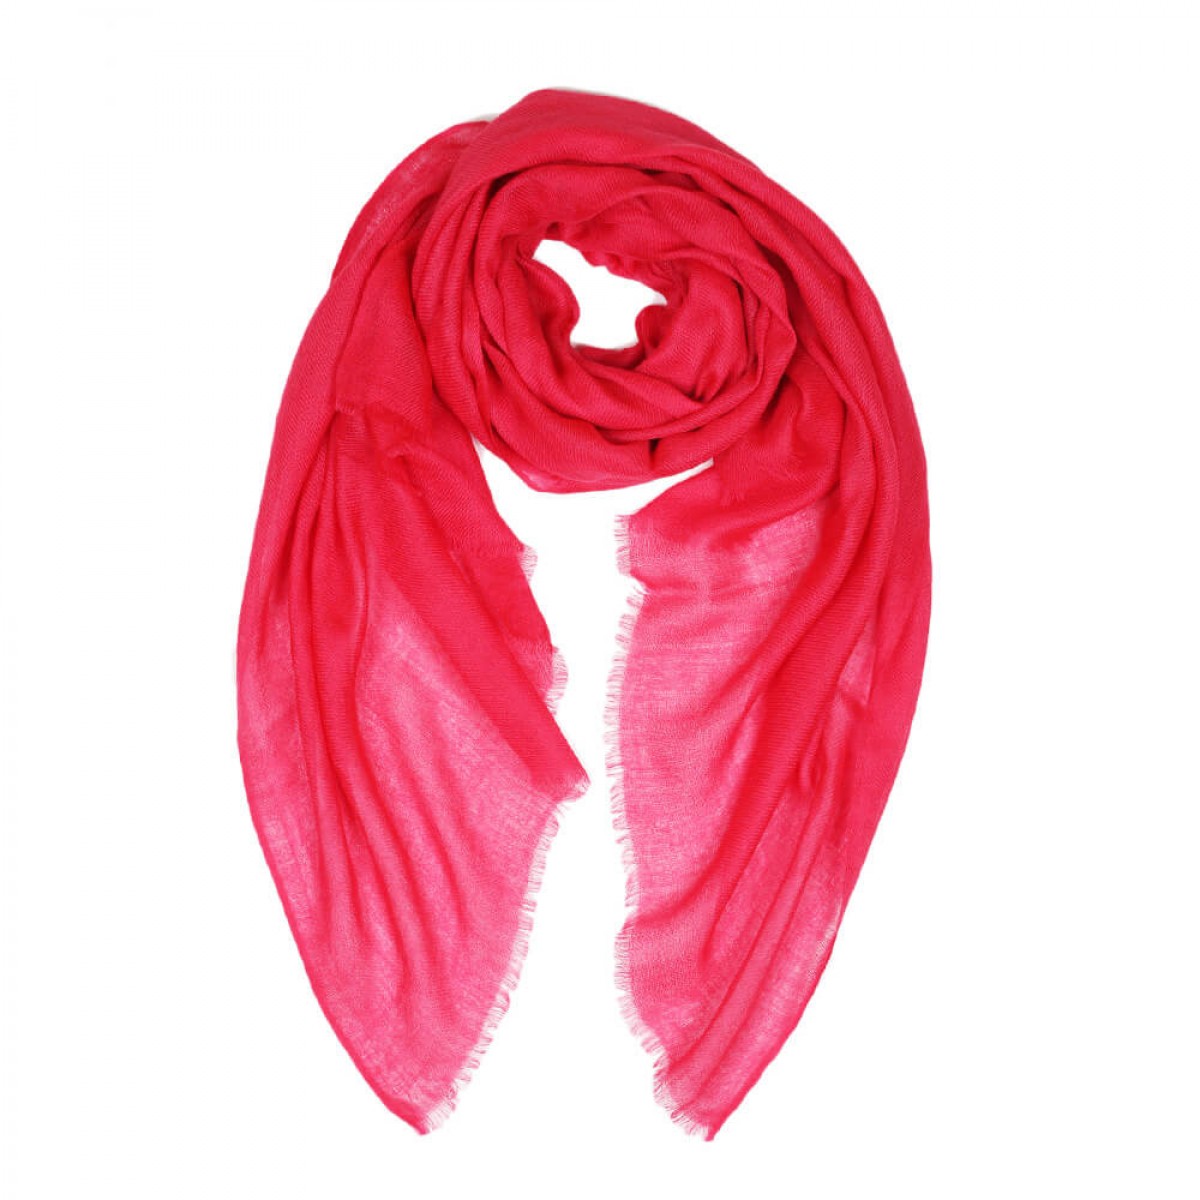 Sheer Pashmina Stole - Raspberry Red